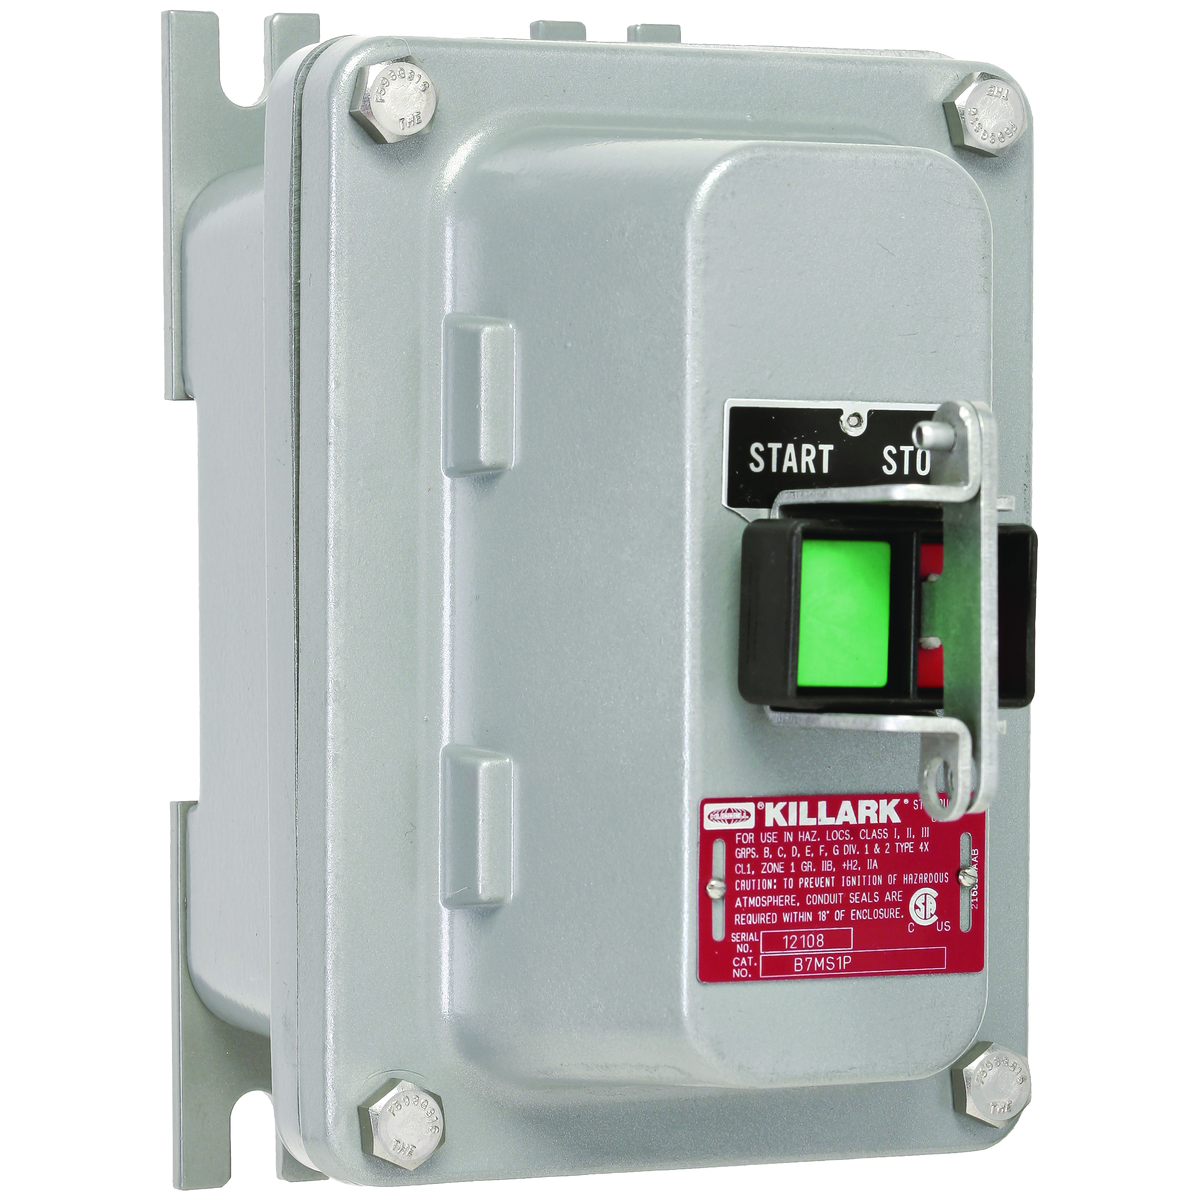 B7MS SERIES - ALUMINUM COMPACT PUSH BUTTON STYLE ENCLOSURE WITHOUTMANUAL IEC STARTER - B7EP ENCLOSURE ONLY